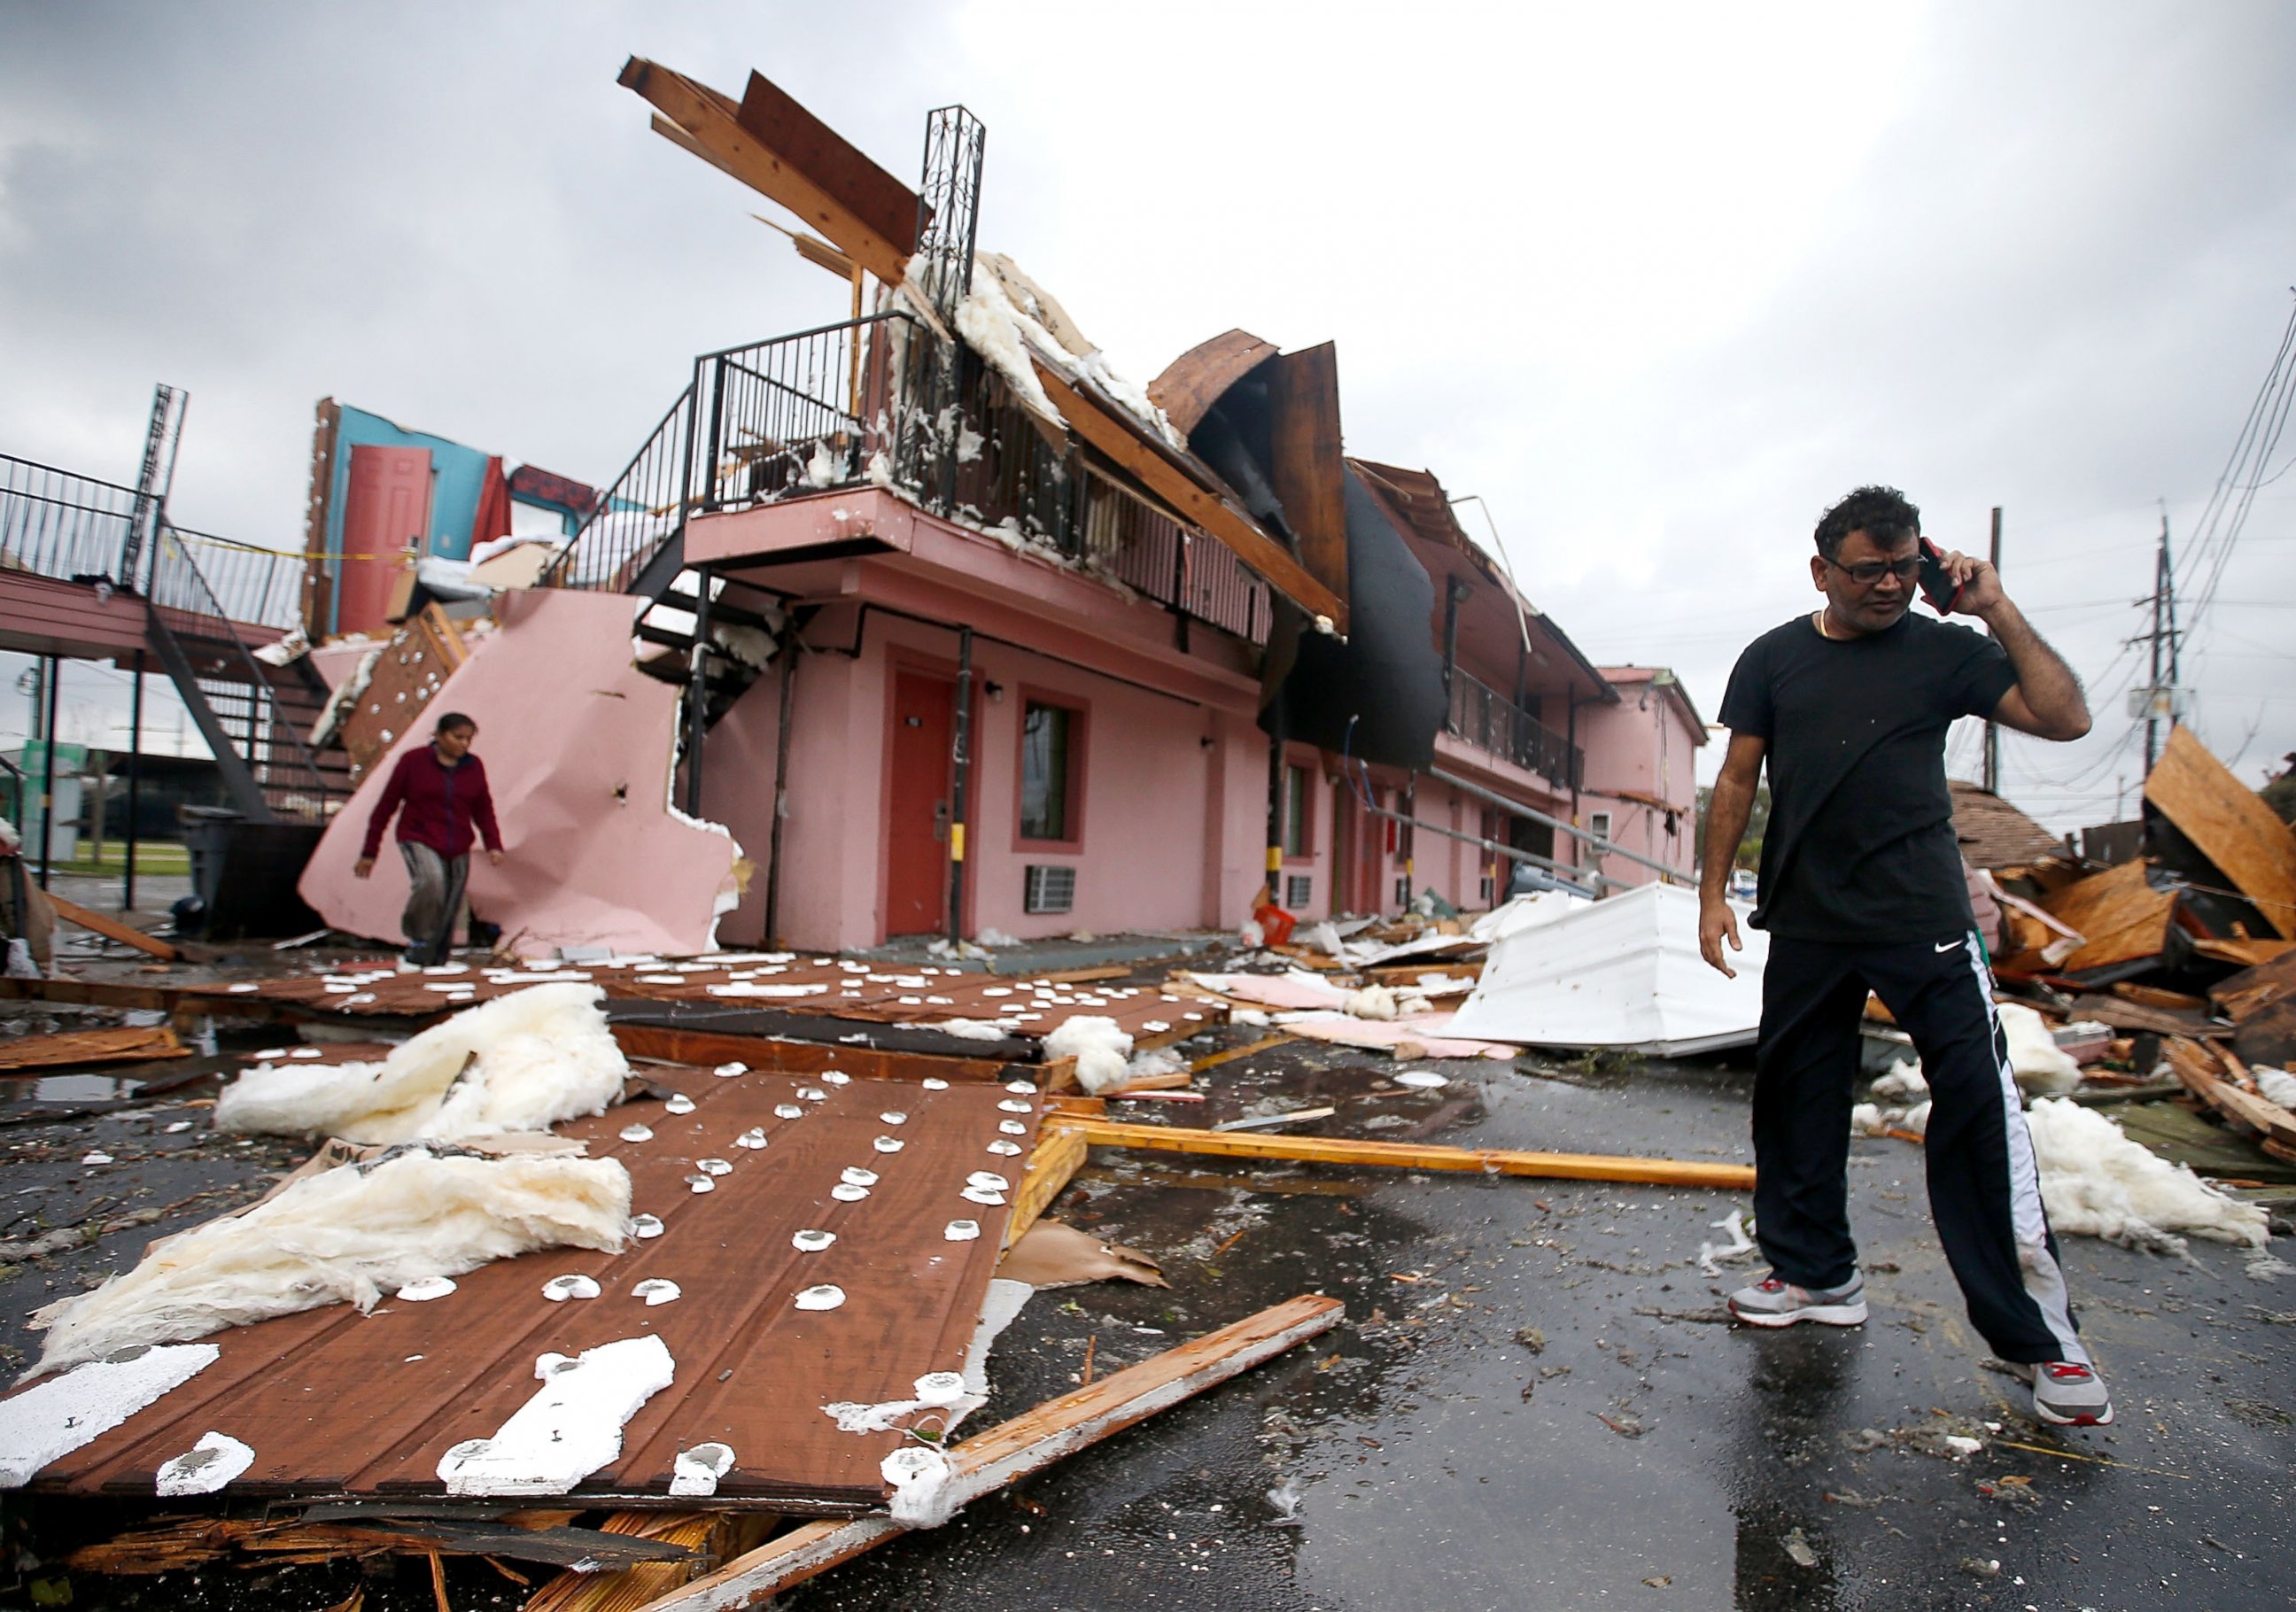 PHOTO: A man walks through the debris of what was once a motel on Chef Menture Ave after a tornado touched down on Feb. 7, 2017 in East New Orleans, Louisiana.